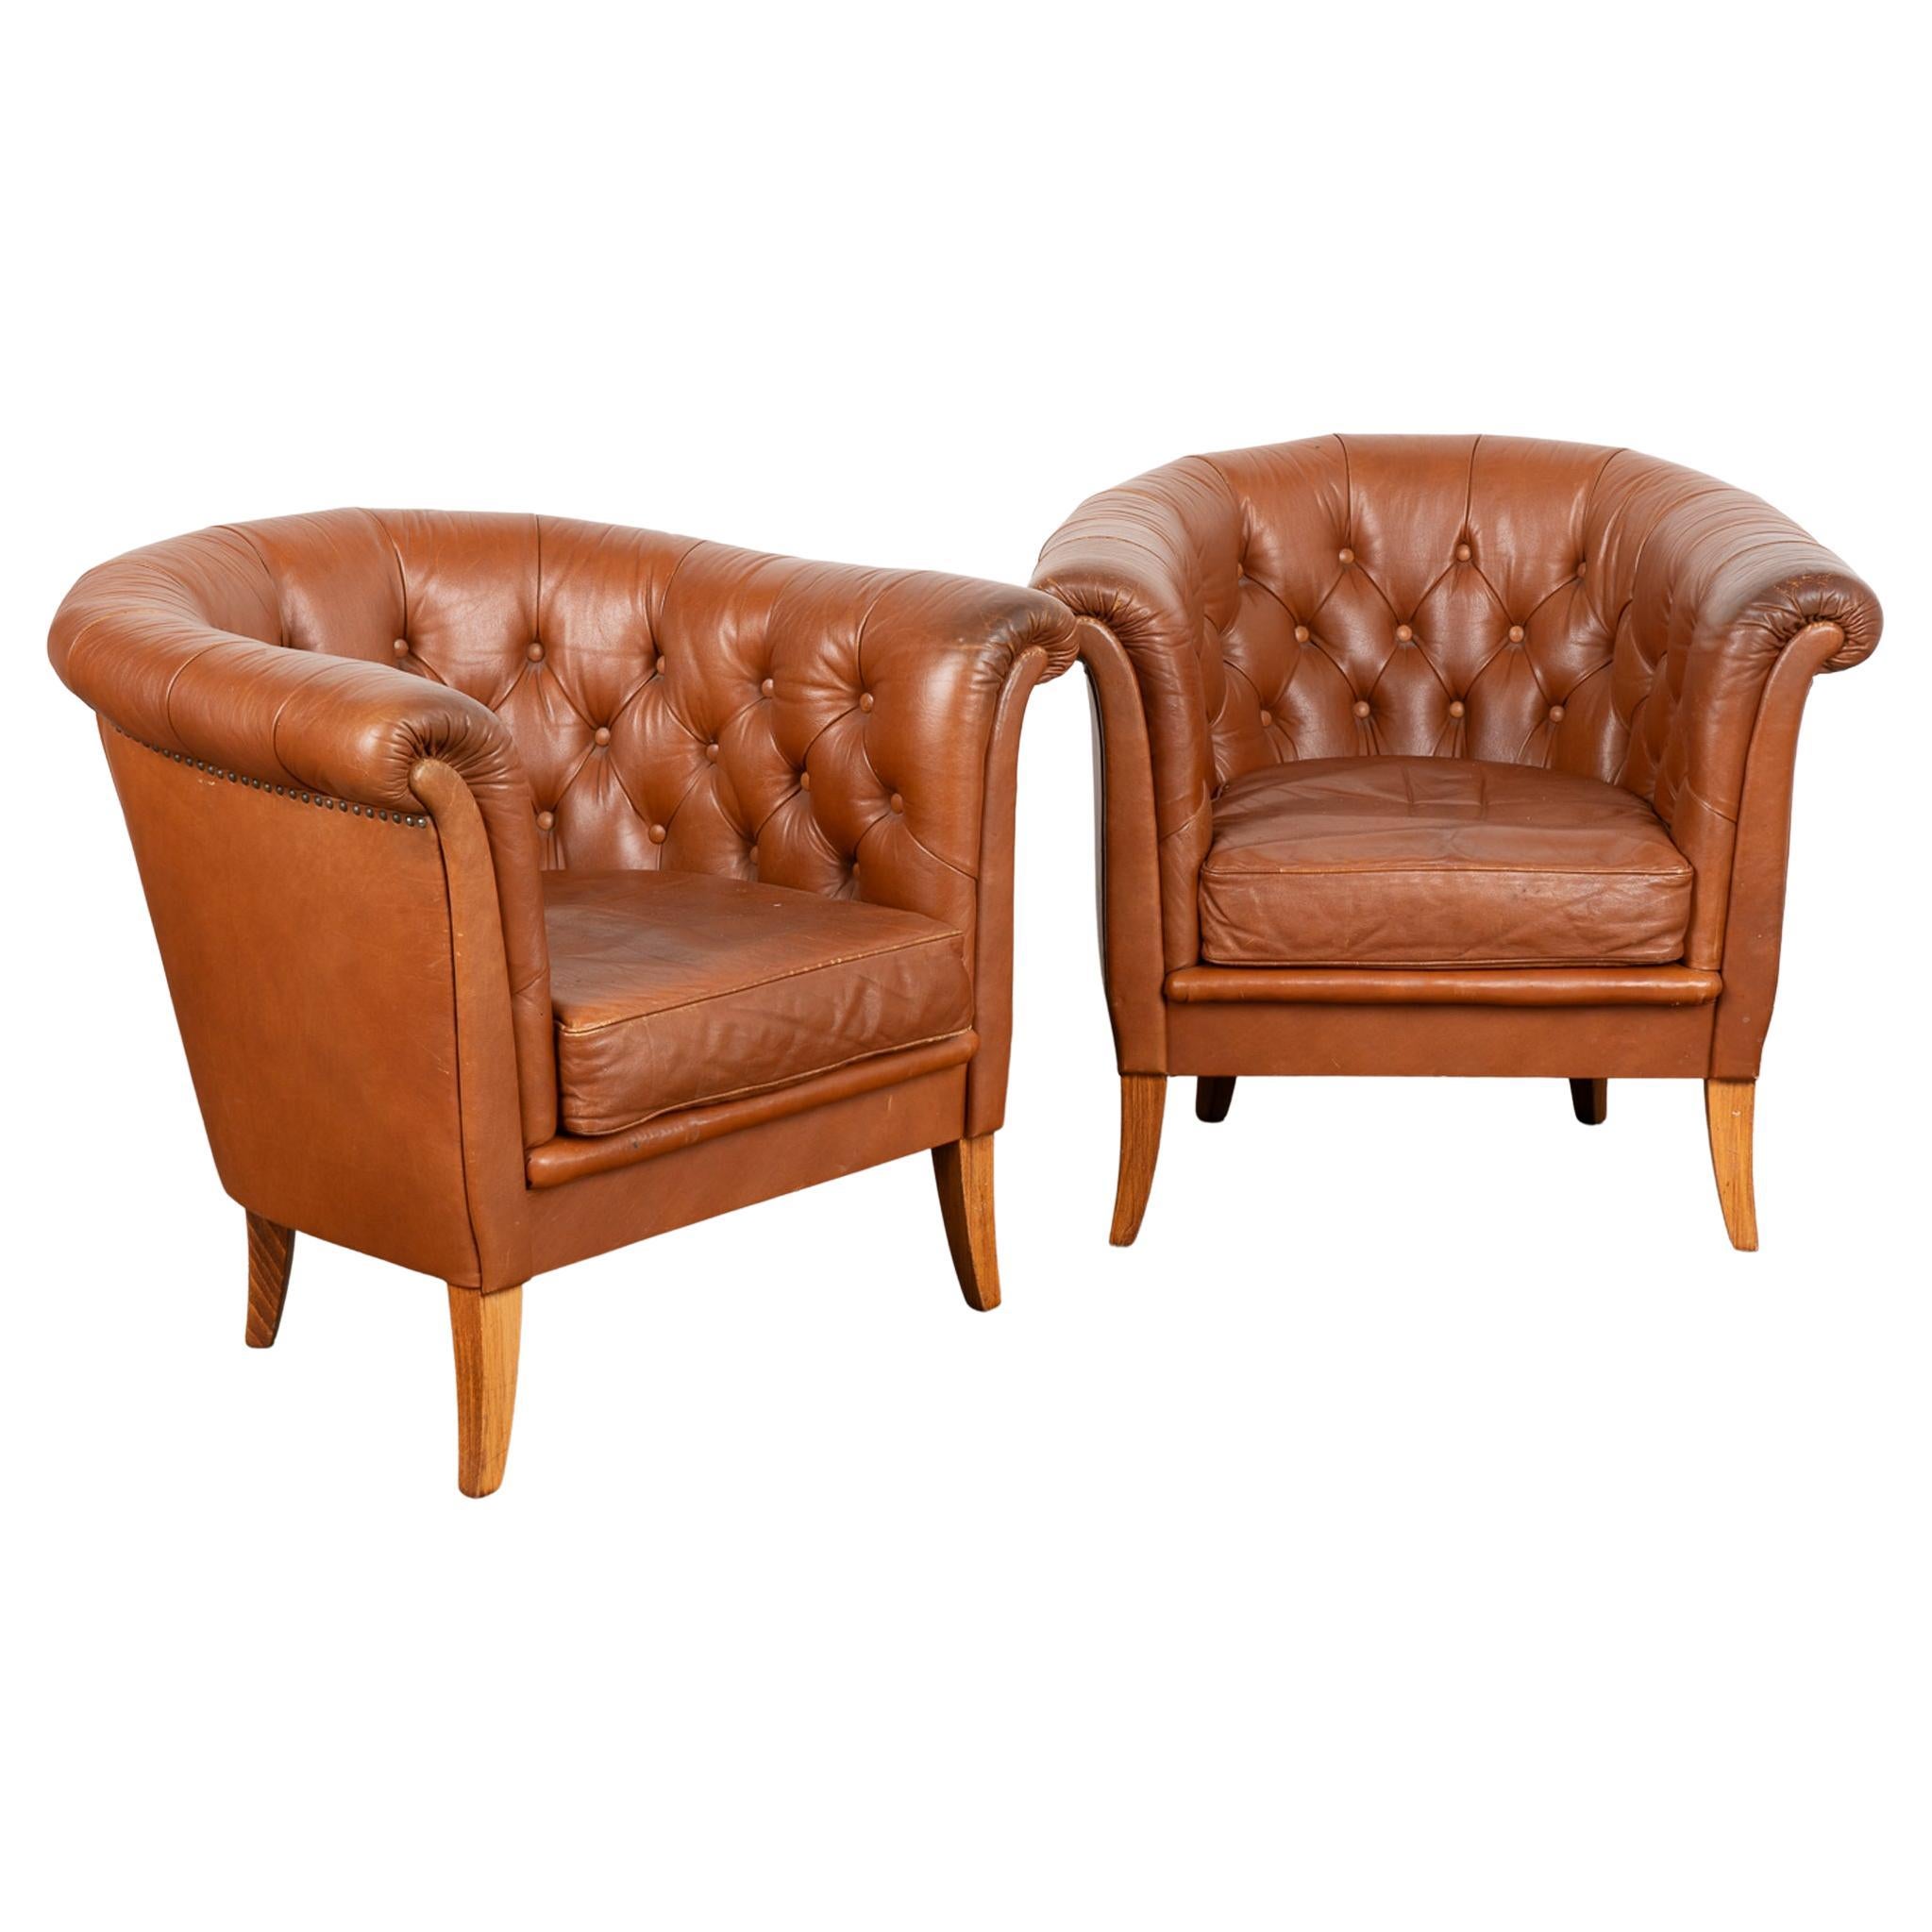 Pair, Mid Century Brown Leather Barrel Back Arm Chairs, Denmark circa 1960-70 For Sale